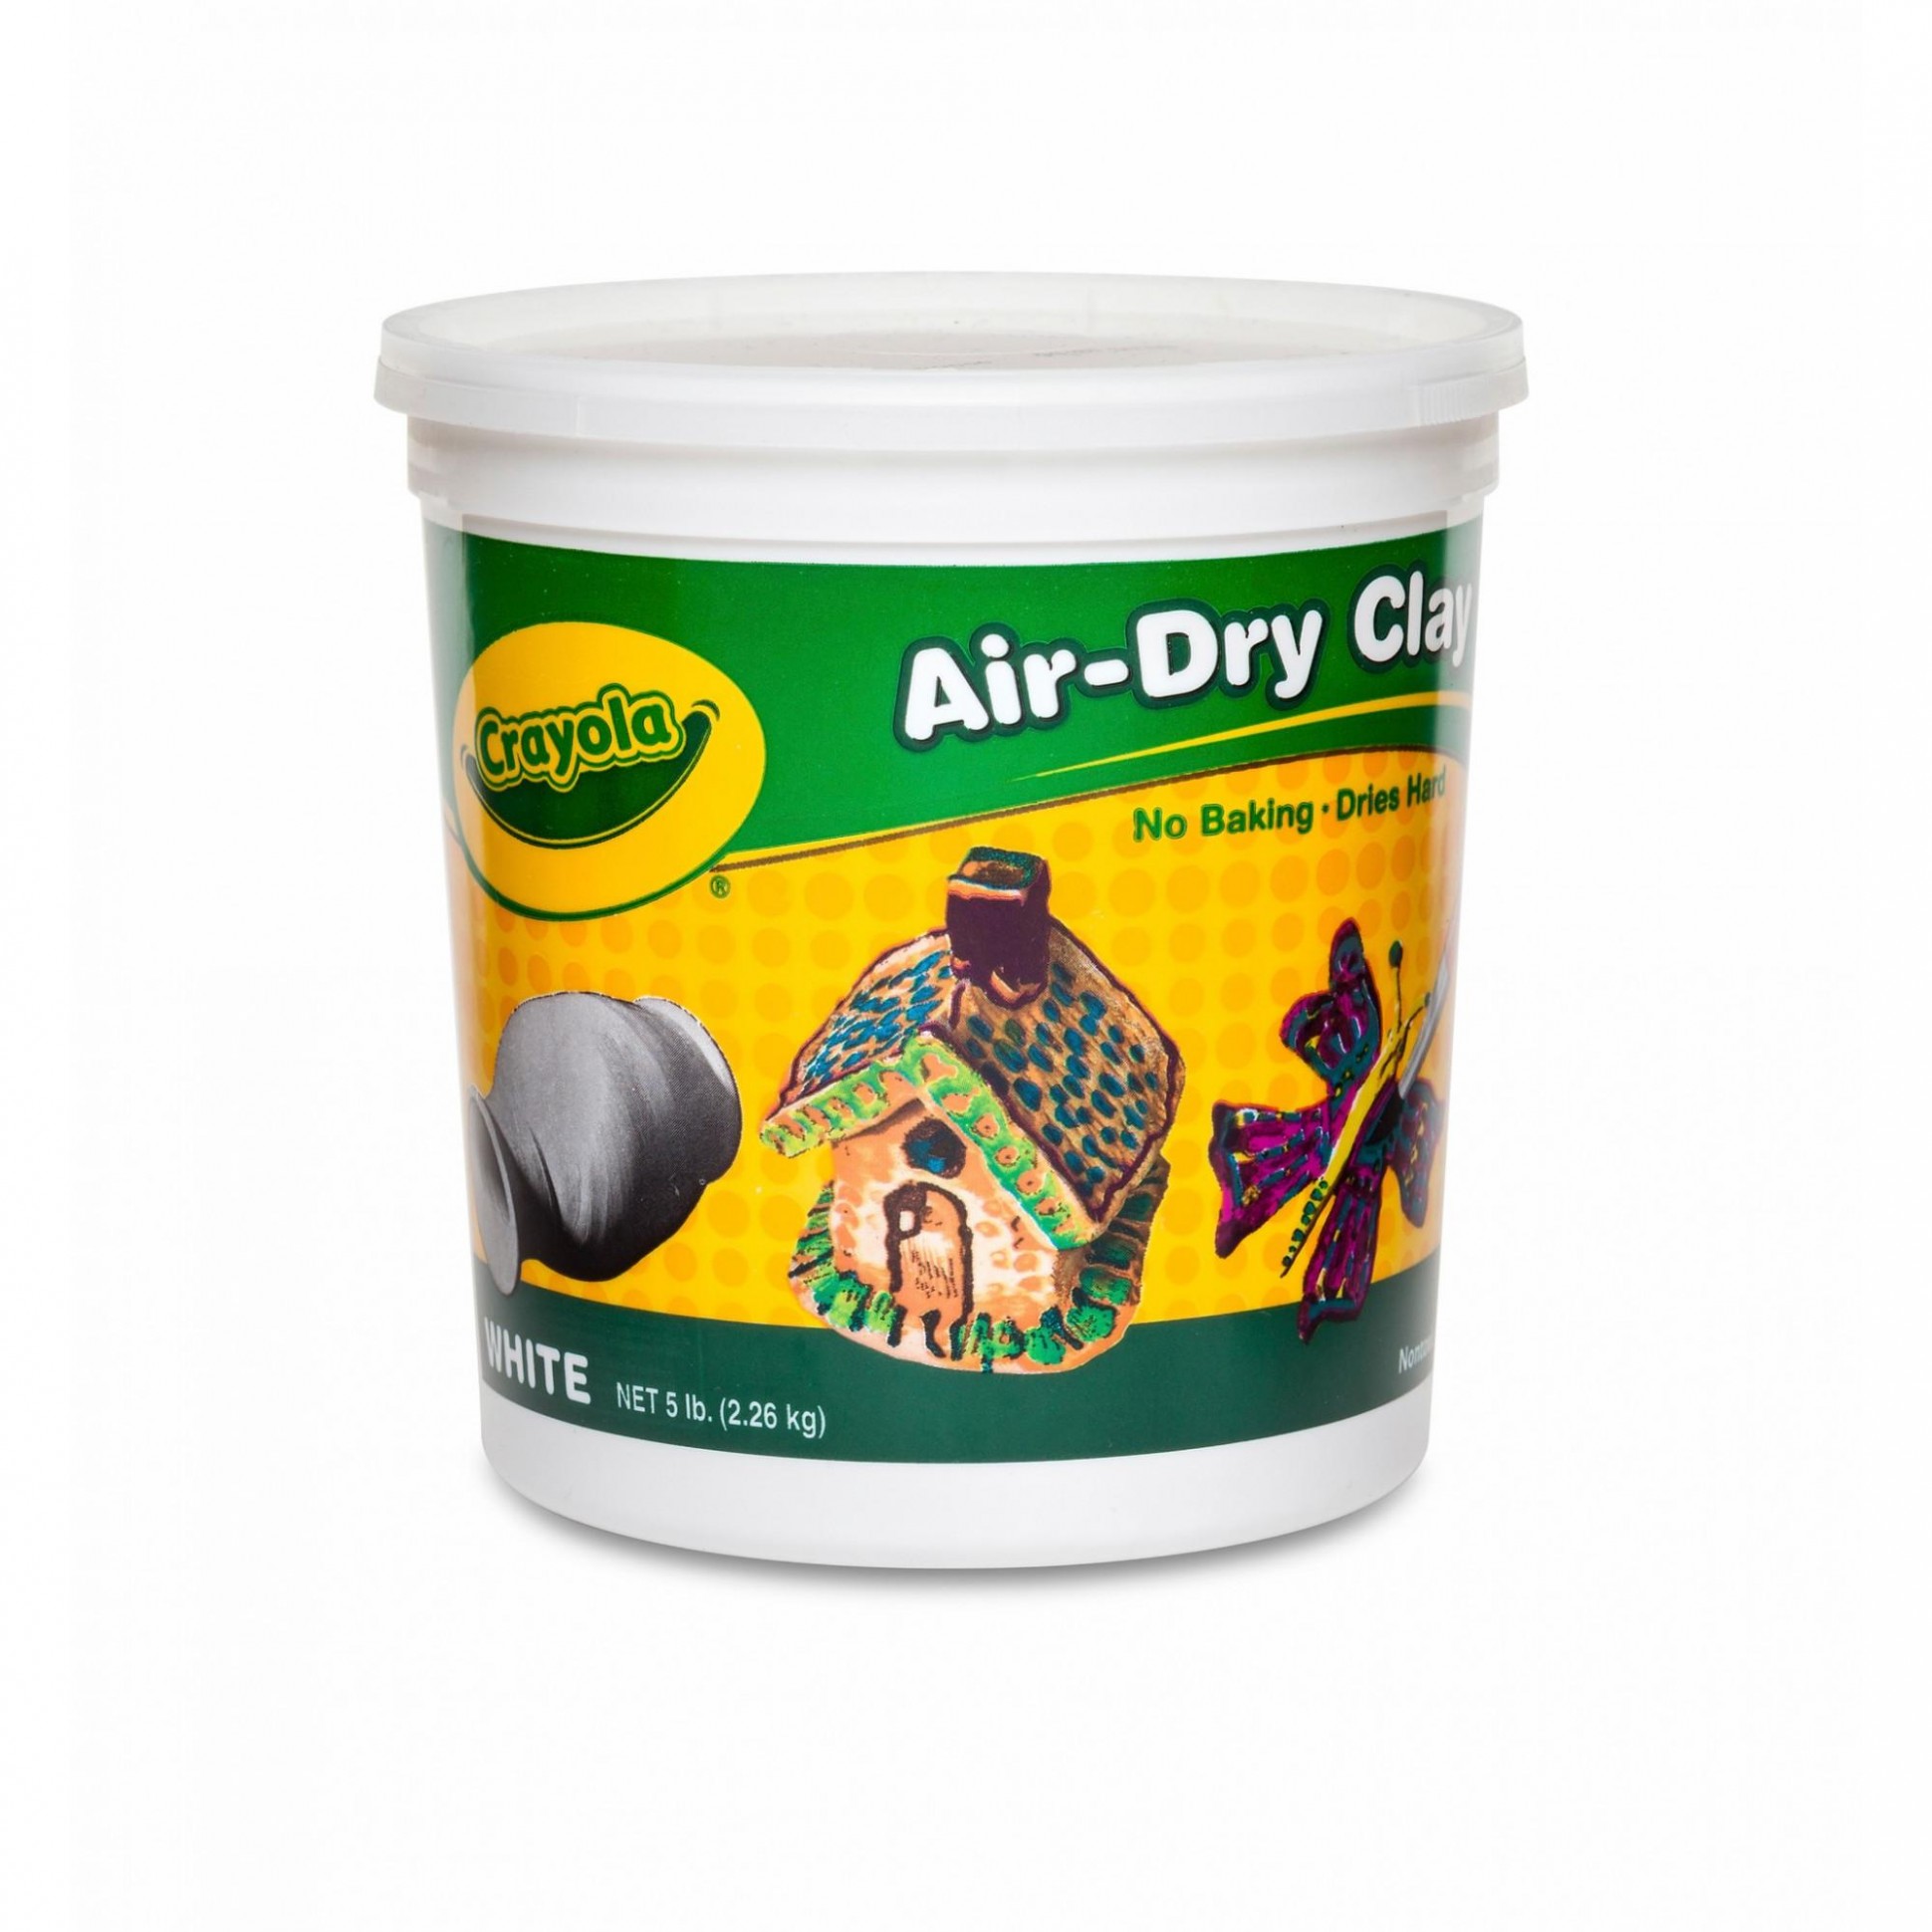 Crayola Air Dry Clay Bucket, No Bake Clay For Kids, 9lbs, White ..